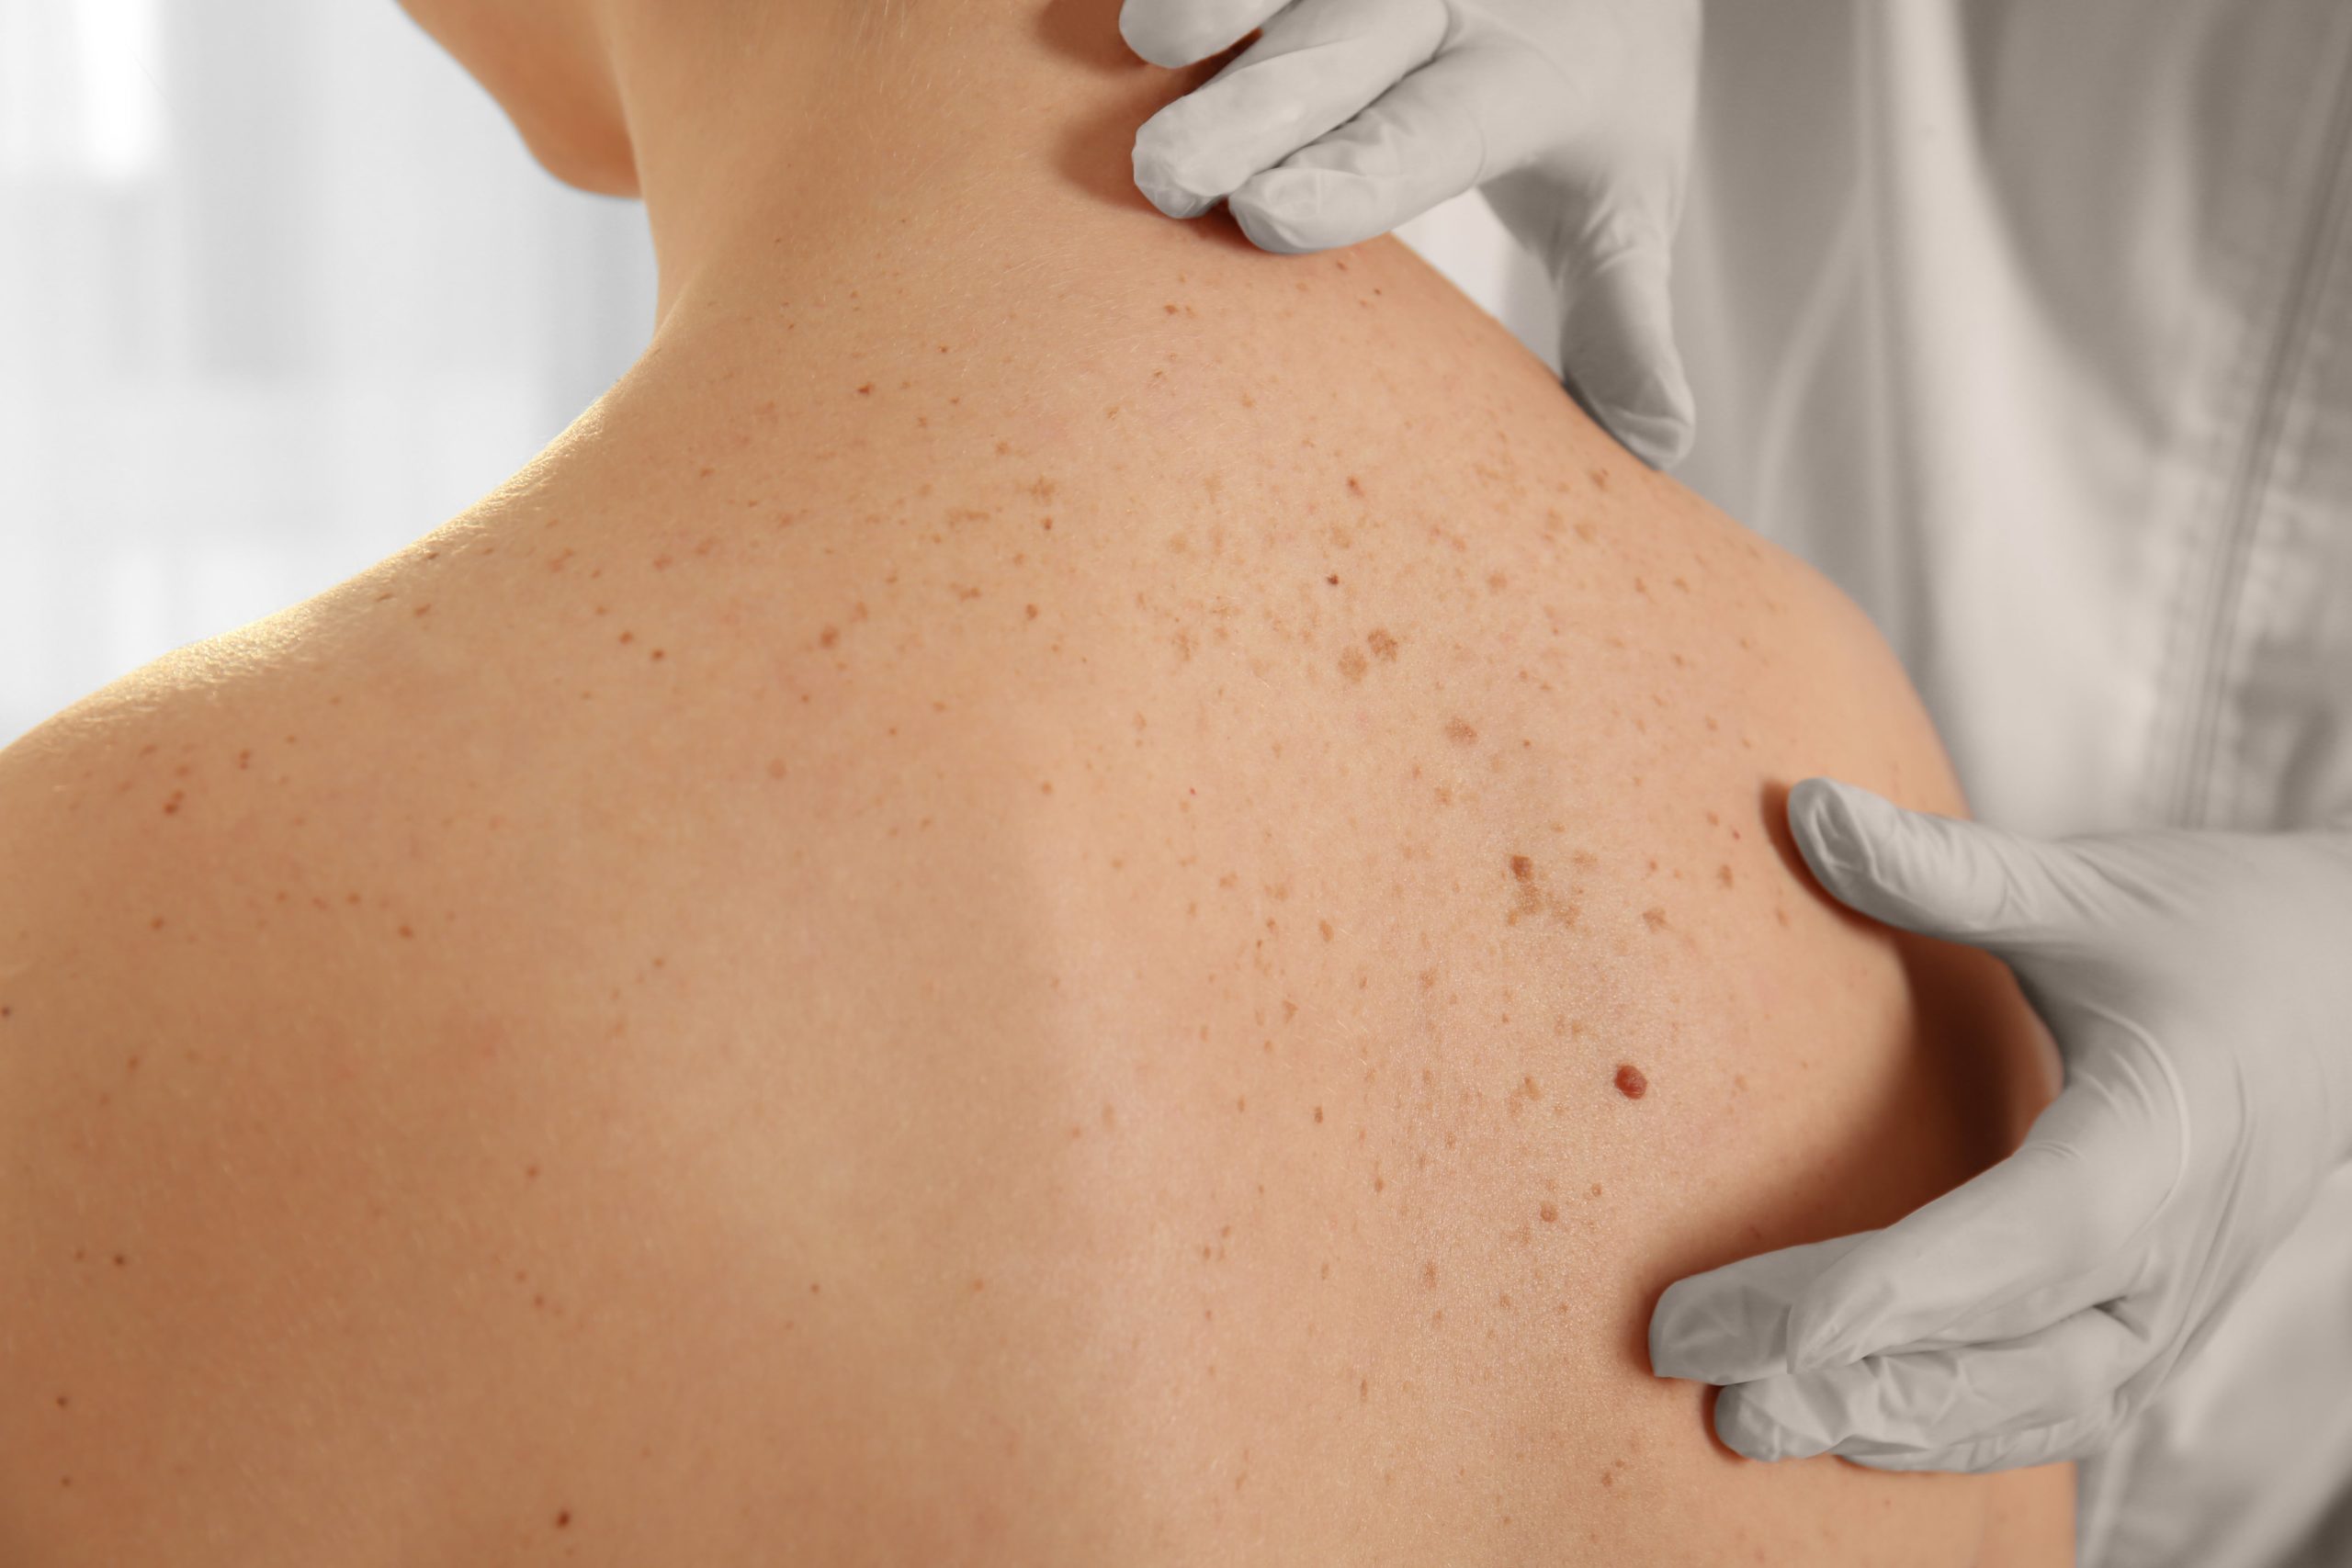 Holistic Skin Cancer Checks and Excisions